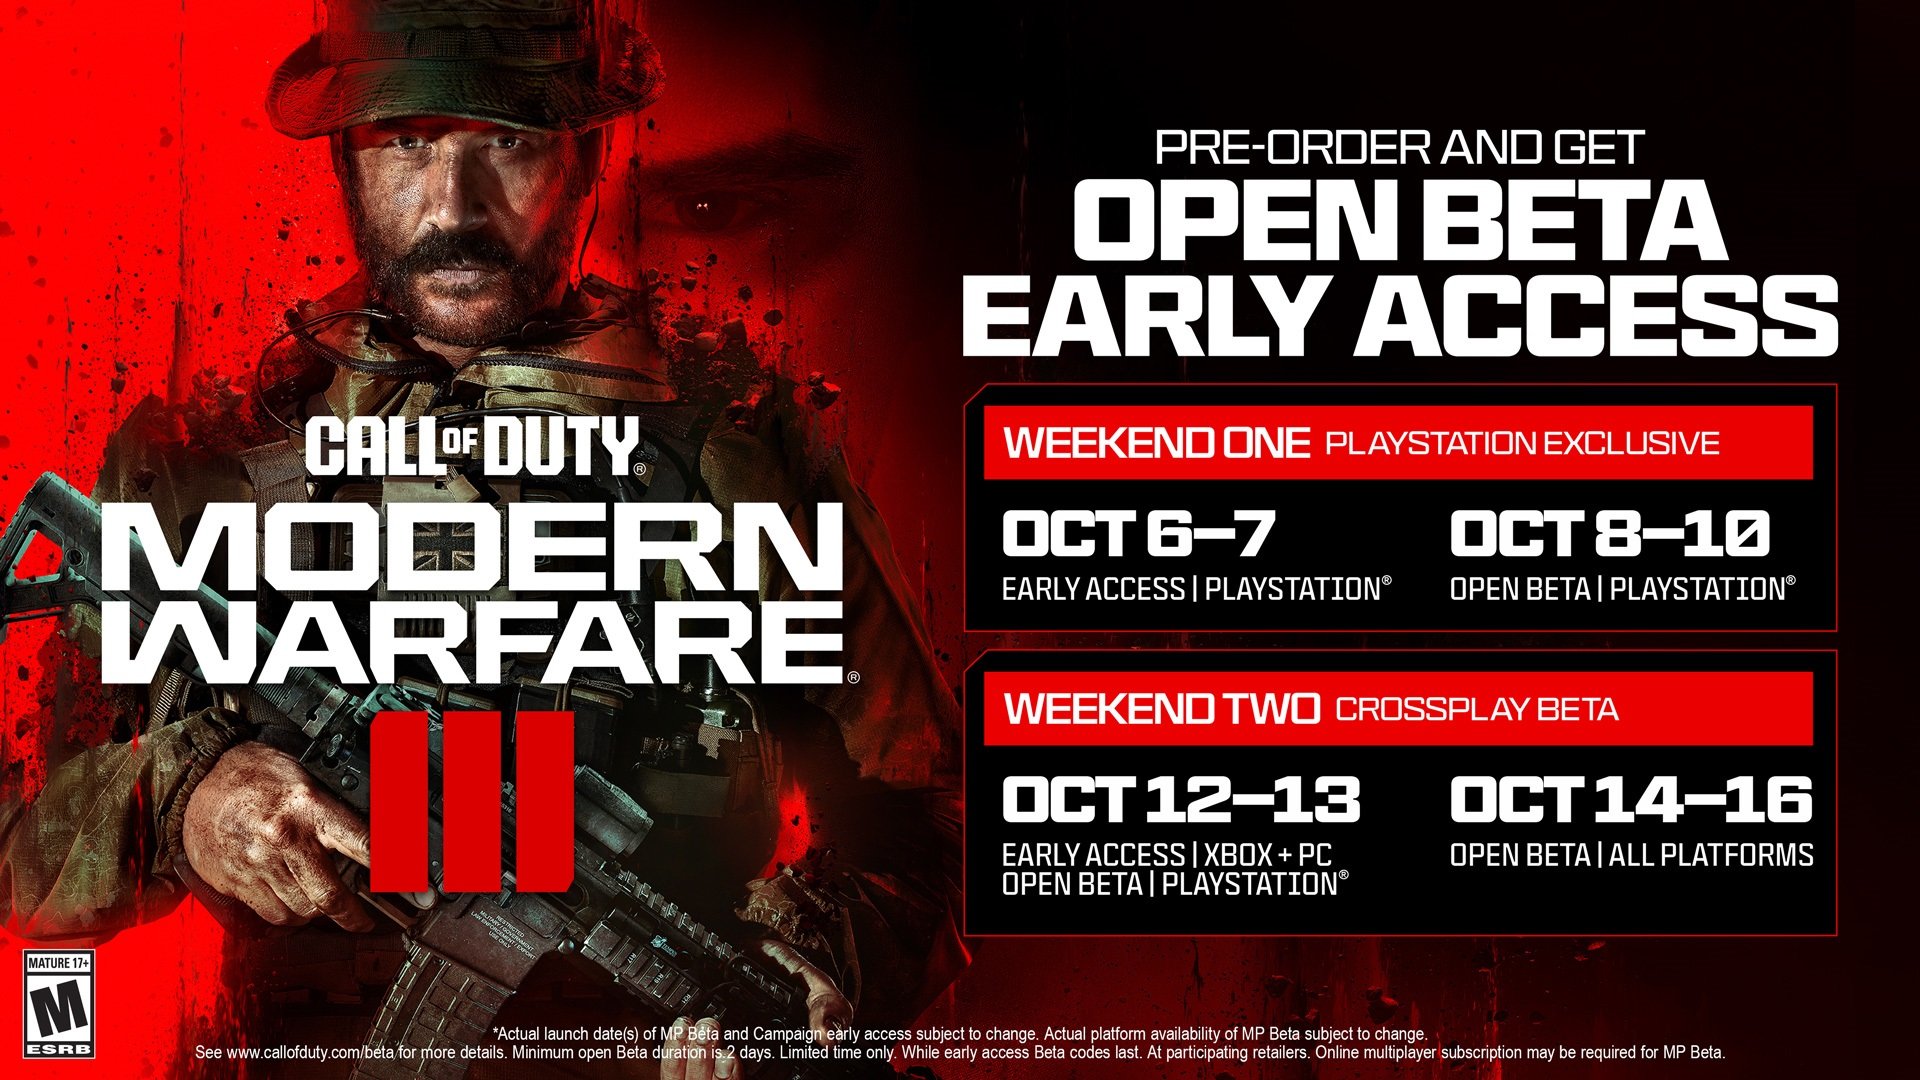 Call of Duty Modern Warfare 3 Multiplayer Beta Global Release Time  Confirmed - IGN